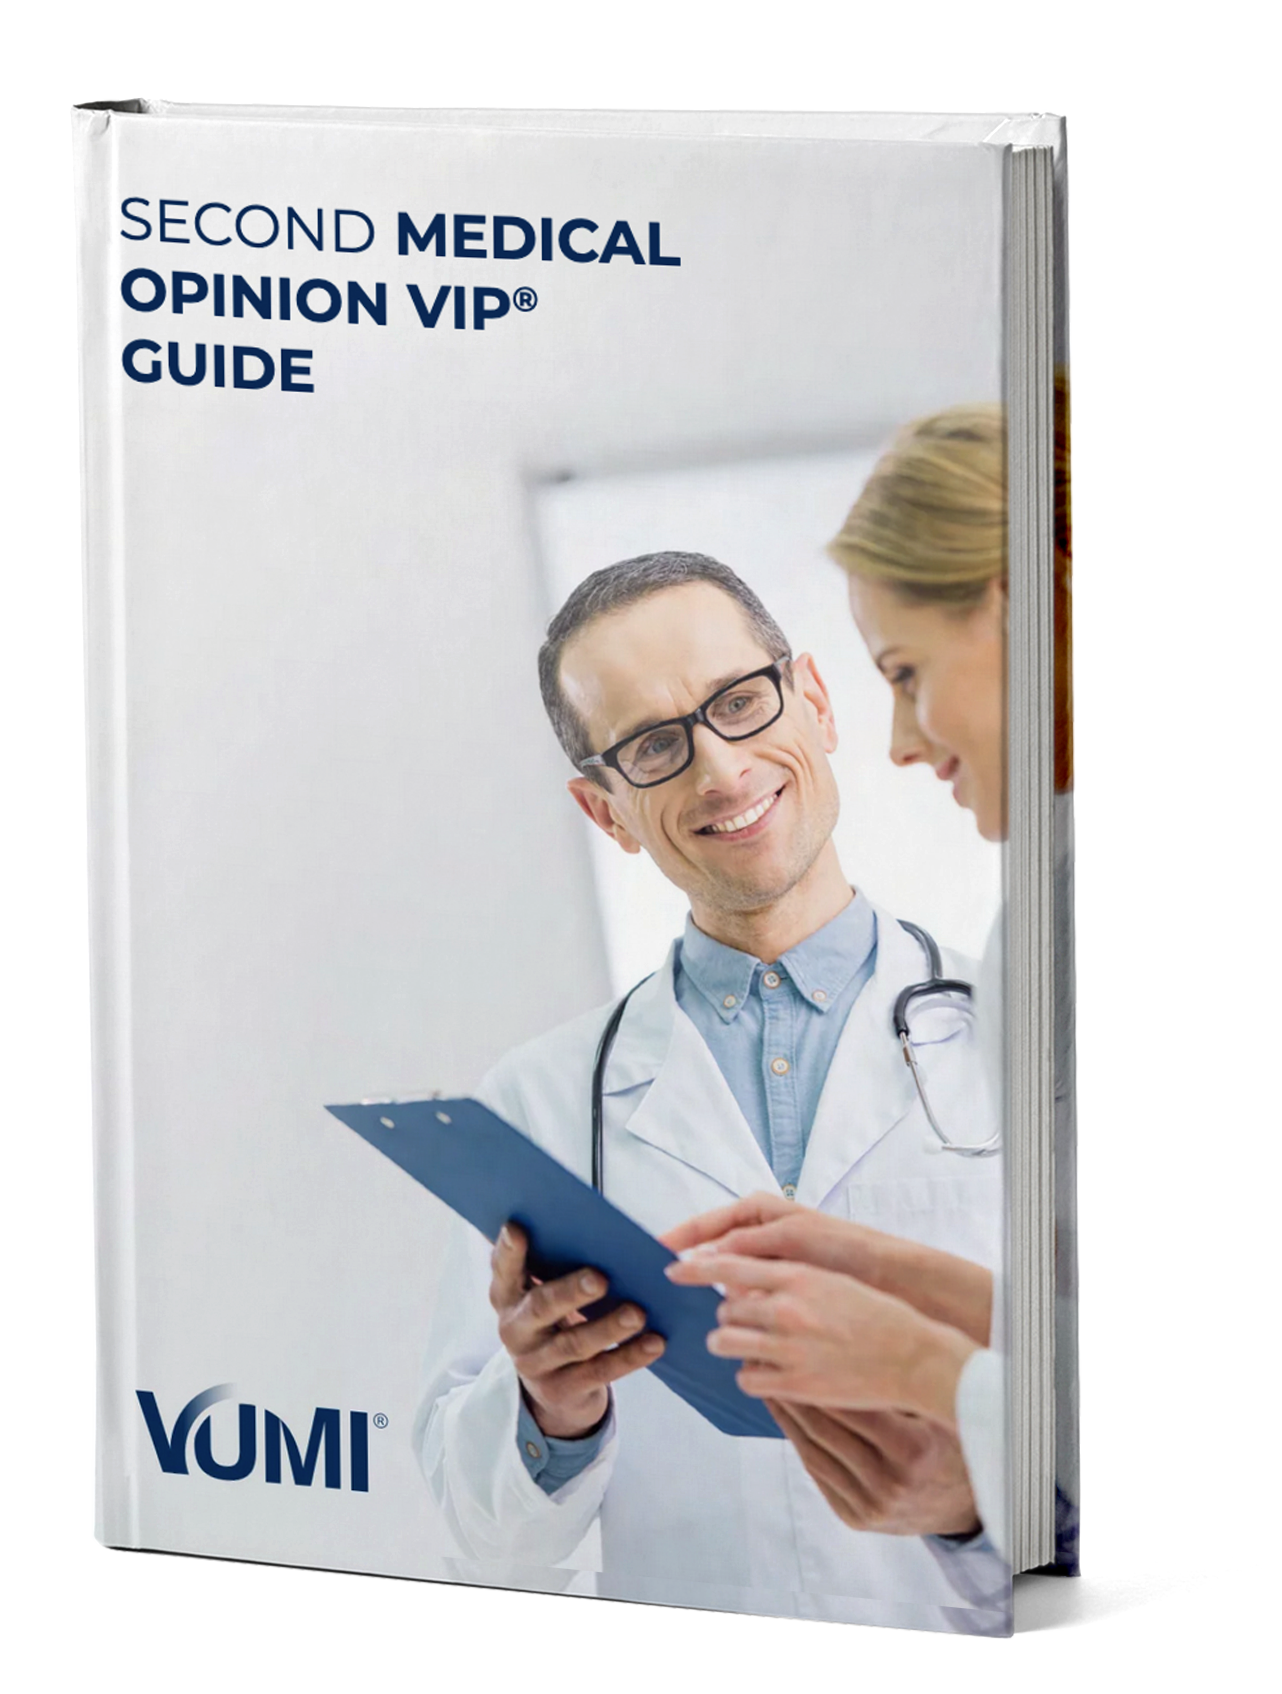 Second medical opinion vip®